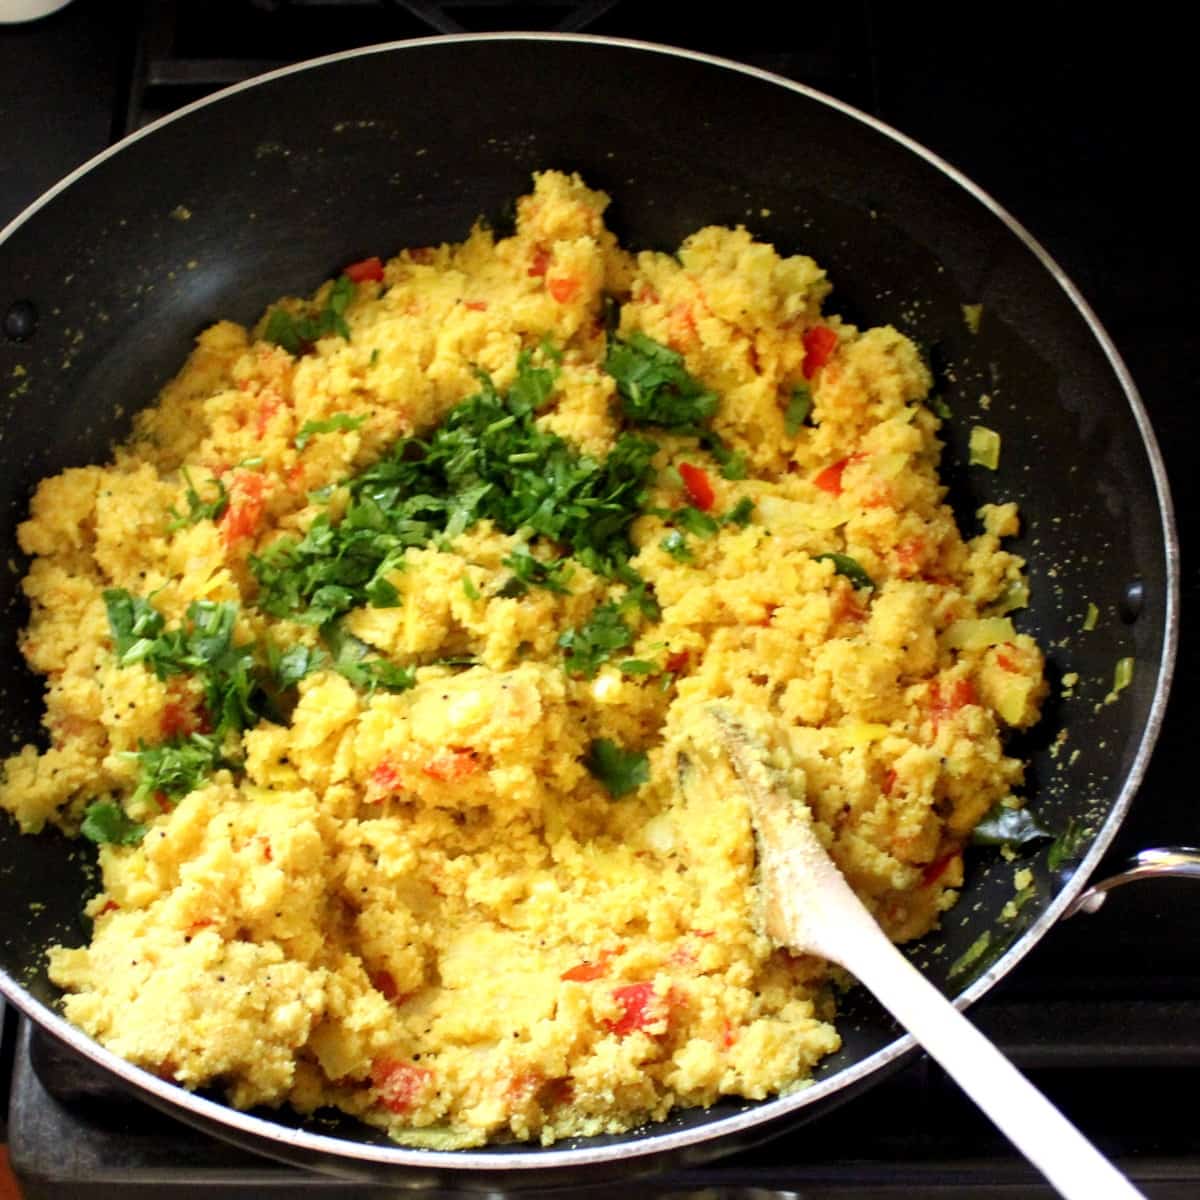 A photo of fluffy rava upma freshly made and garnished with cilantro in a wok with a wooden ladle